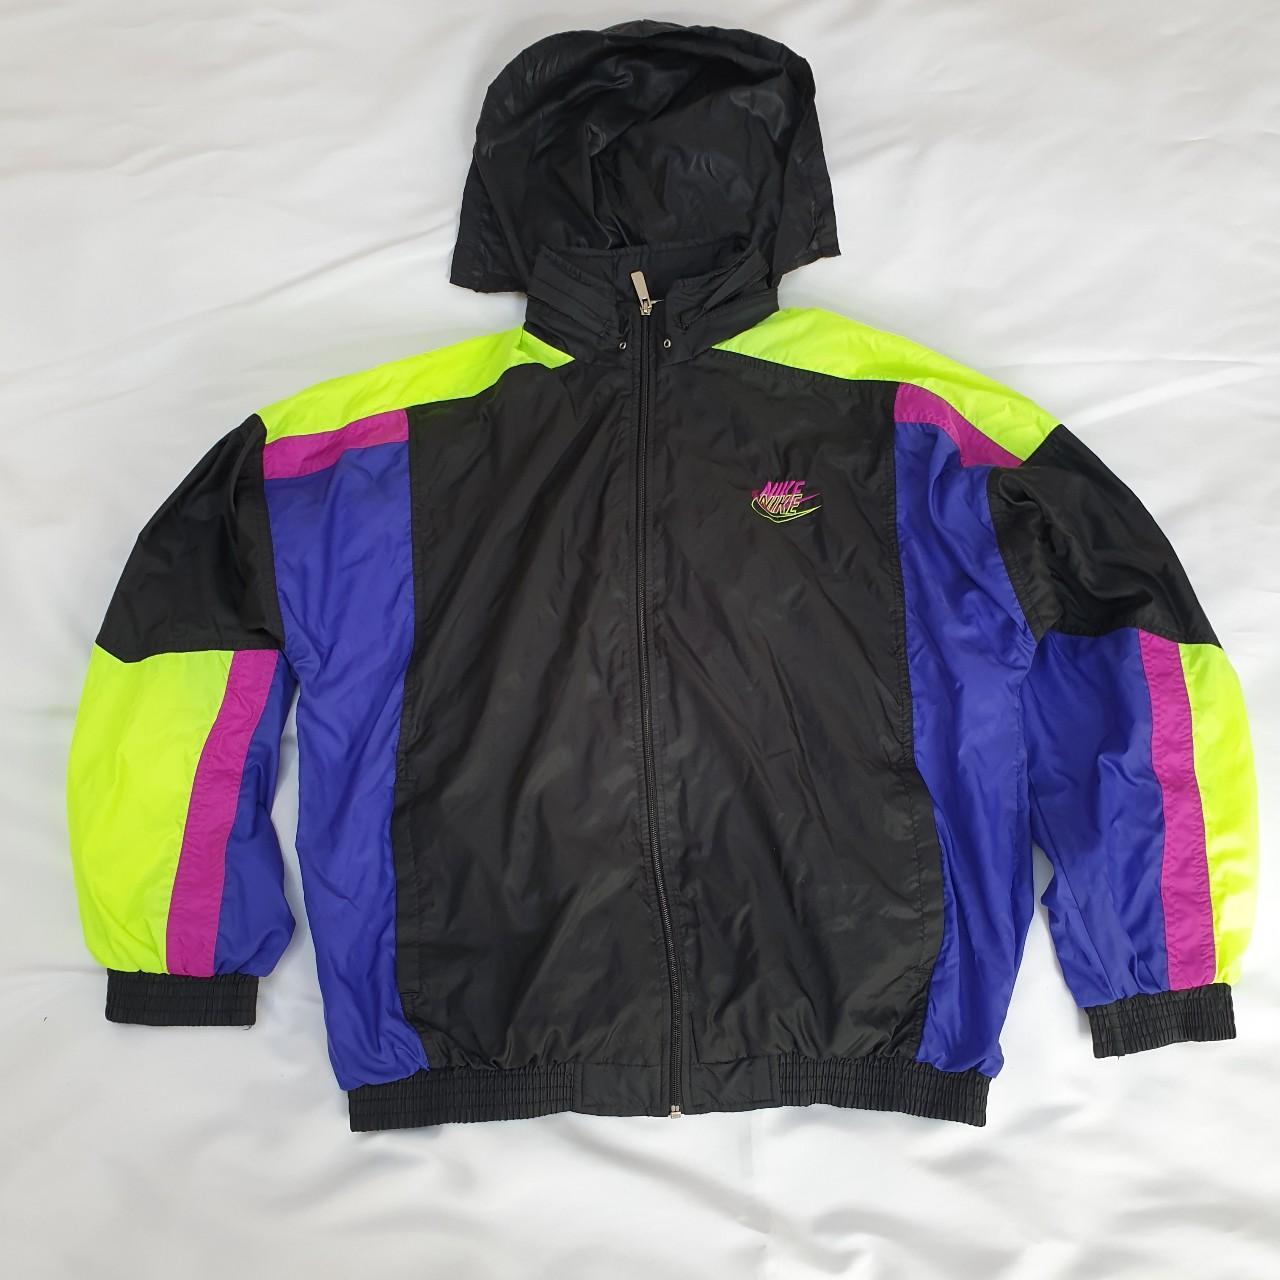 llegar Influencia problema GENUINE VINTAGE 90's NIKE SHELL SUIT. Purchased very... - Depop